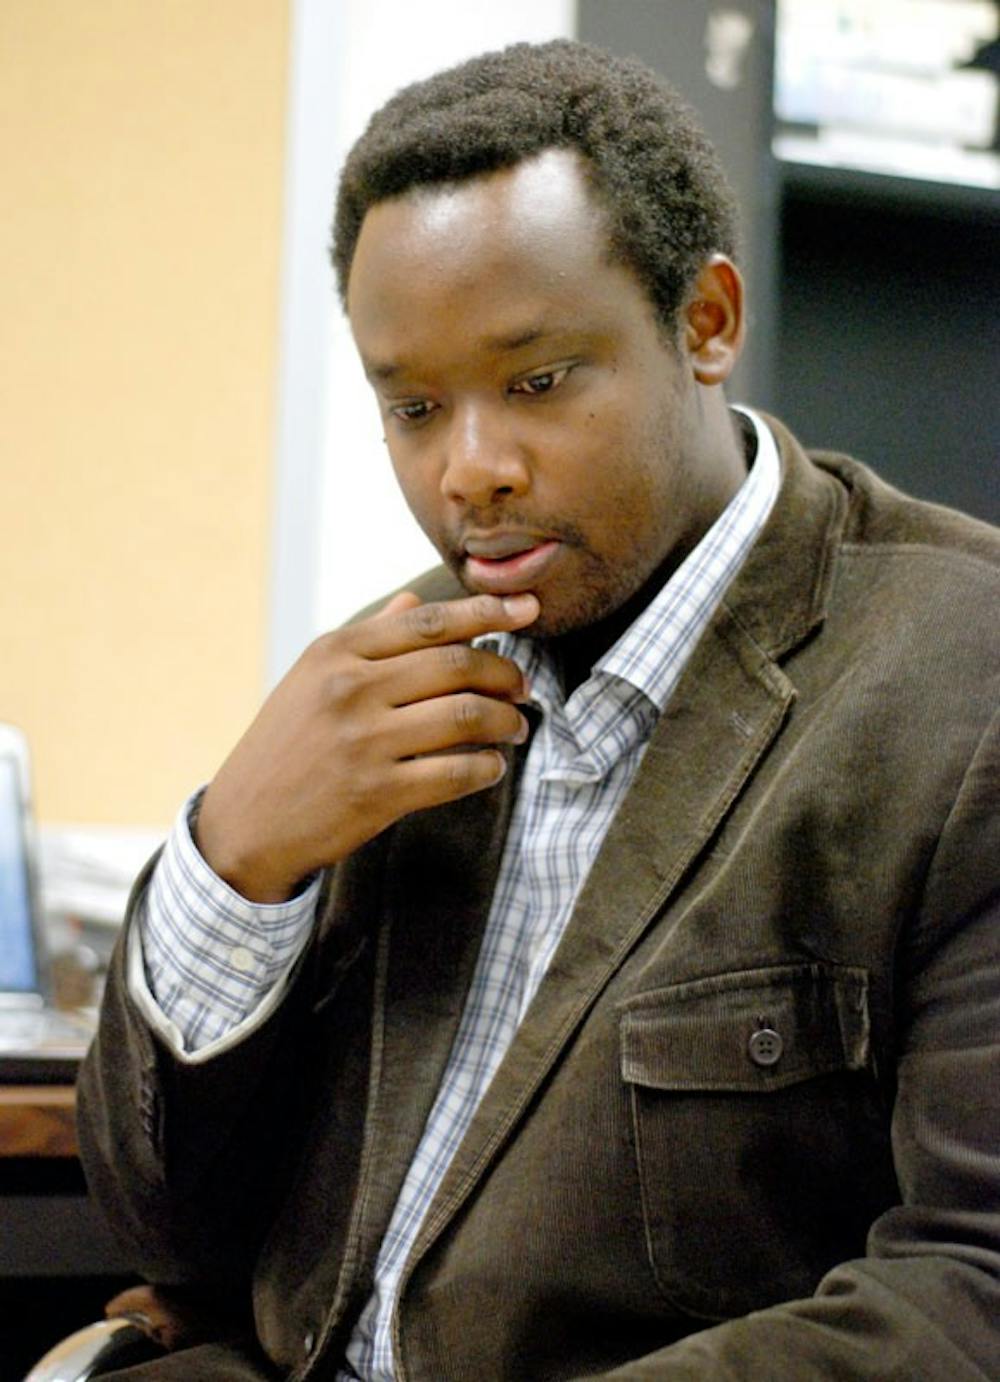 <p>Reverien Mfizi survived the Rwandan Genocide when he was 14 years old. Now, he studies other tragedies similar to his own in pursuit of his Ph.D. </p>